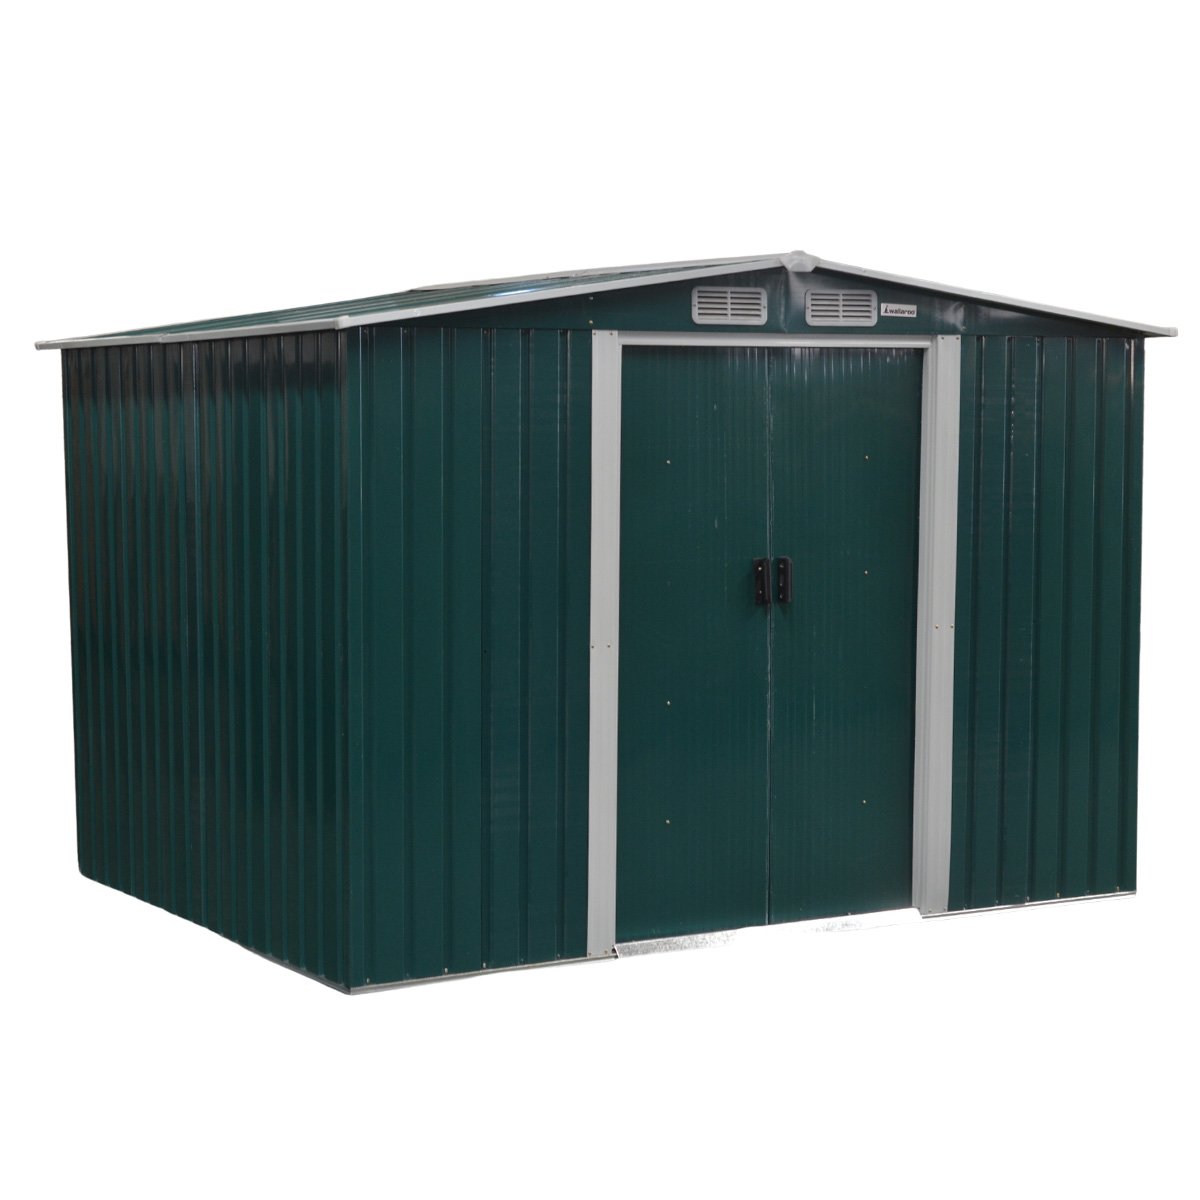 Garden Shed Spire Roof 8x8ft - Green 2